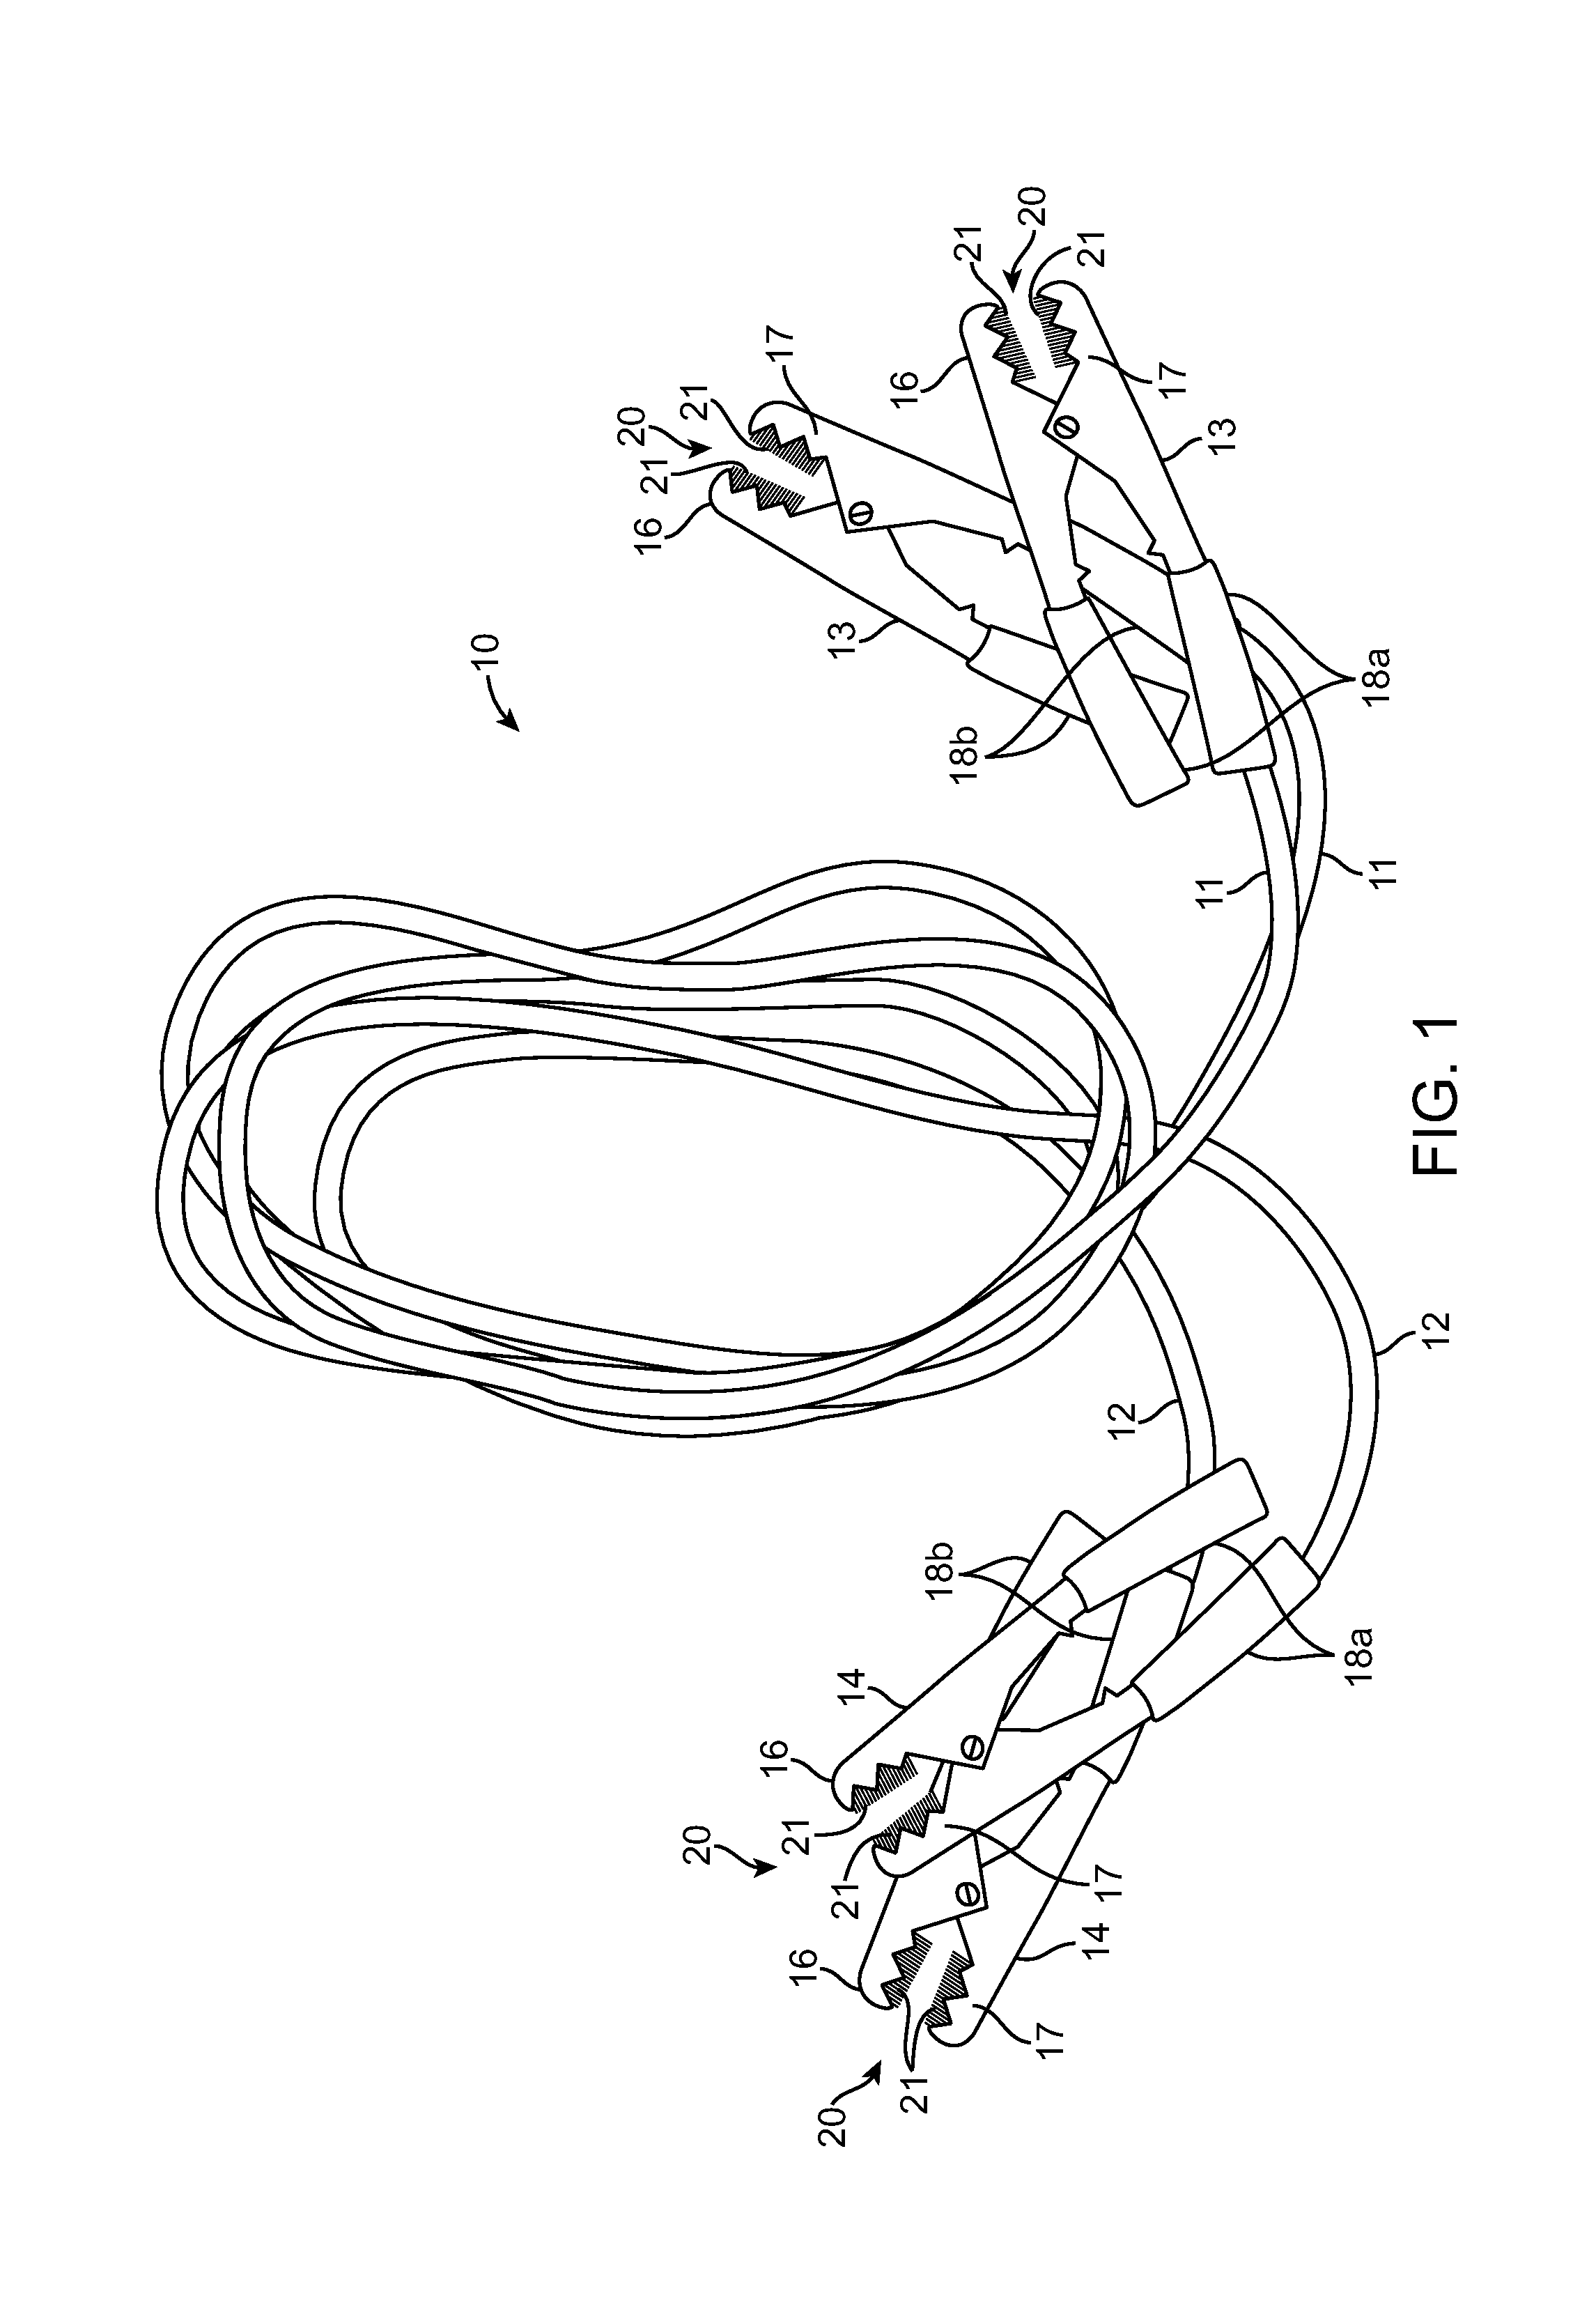 Battery jumper cables with integral wire brush